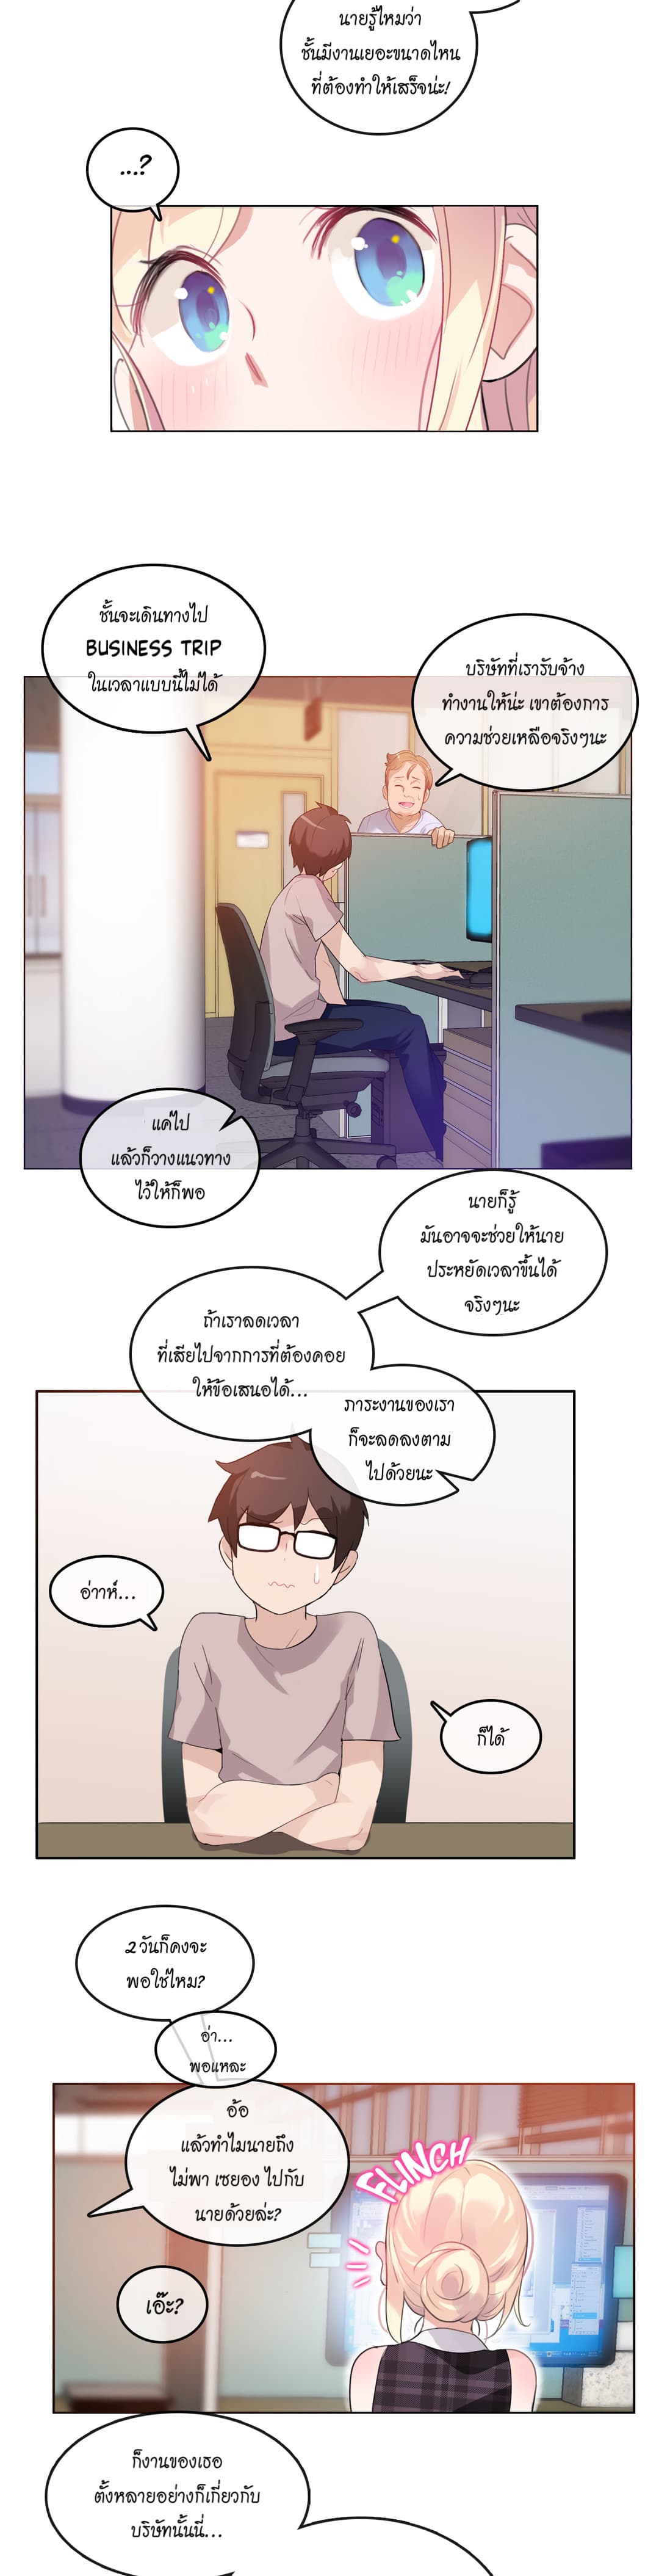 A Pervert’s Daily Life 18 (14)